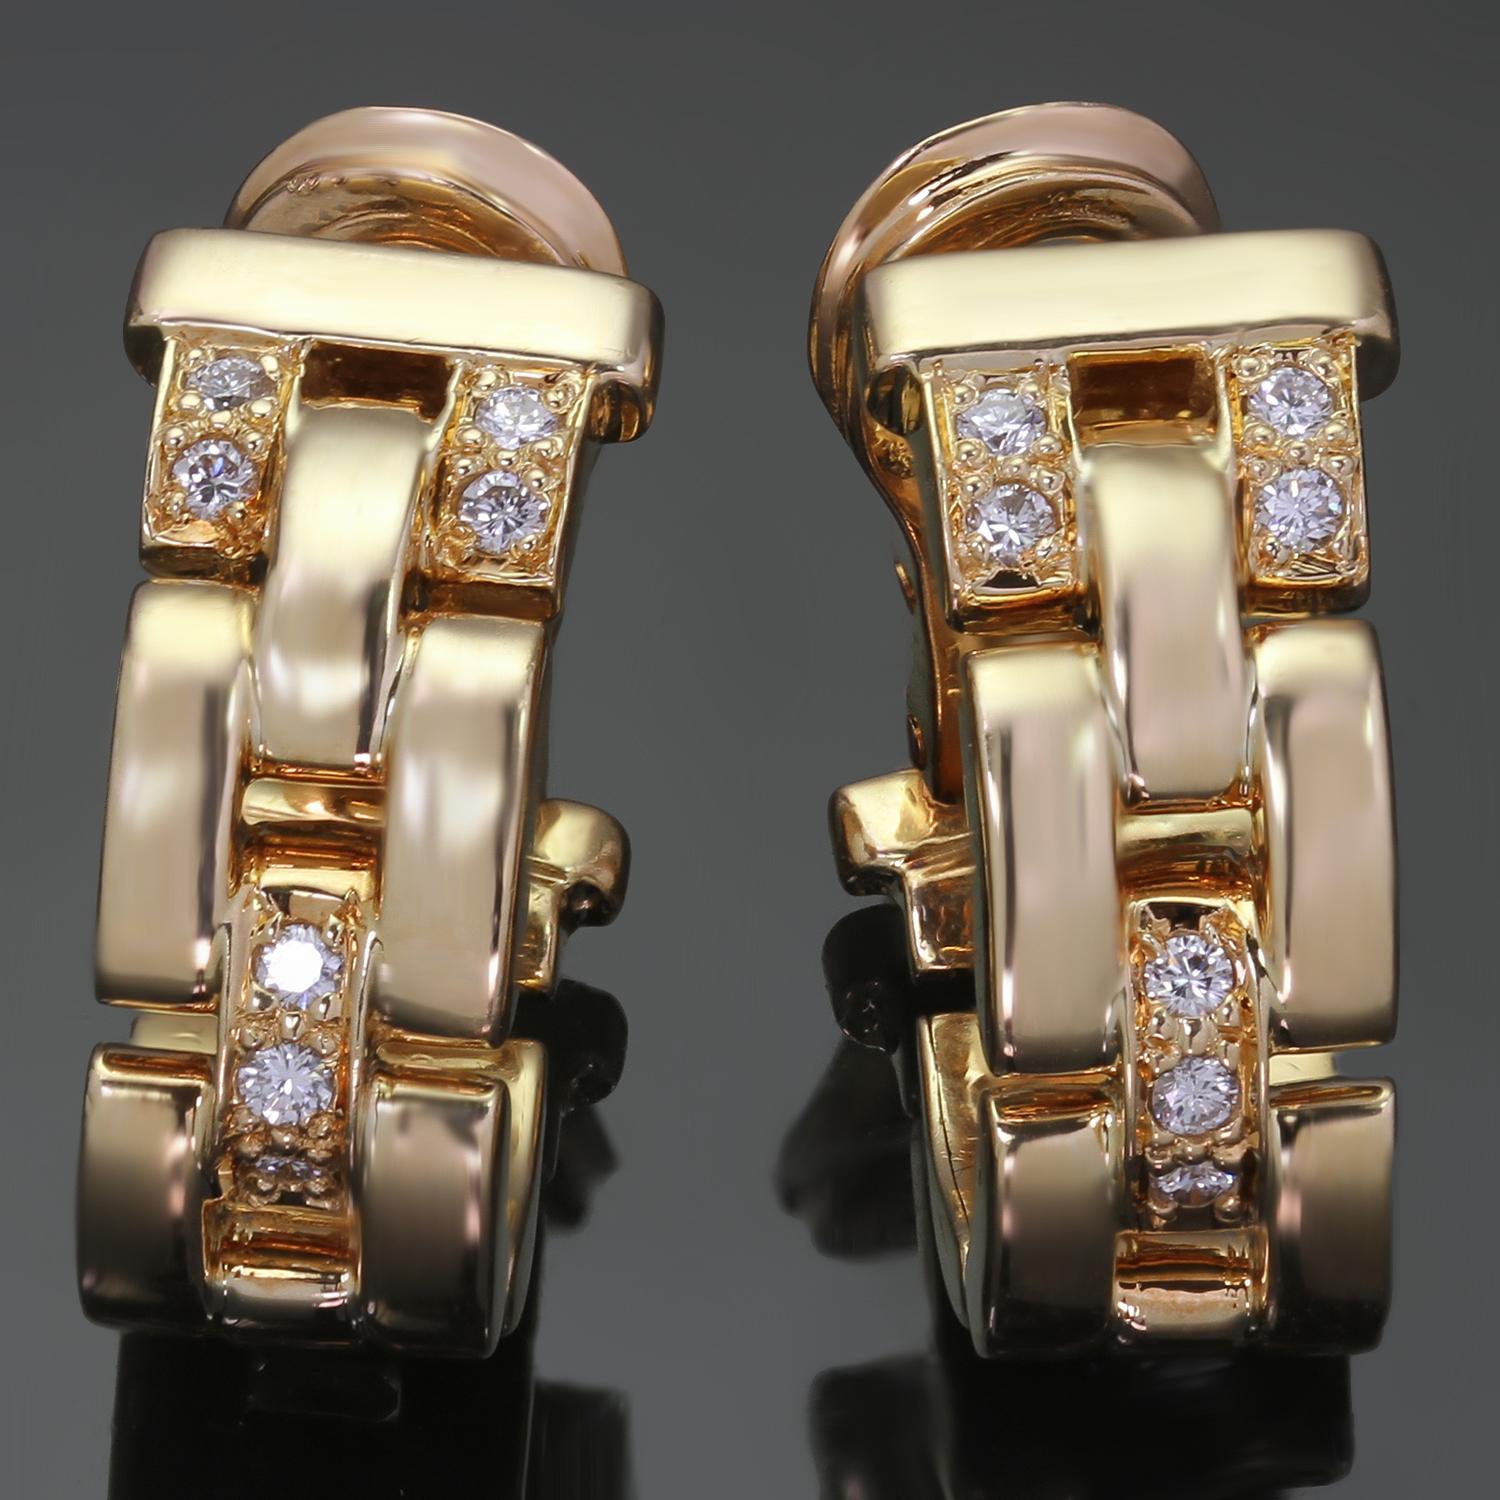 CARTIER Maillon Panthere Diamond 18k Yellow Gold Earrings In Excellent Condition For Sale In New York, NY